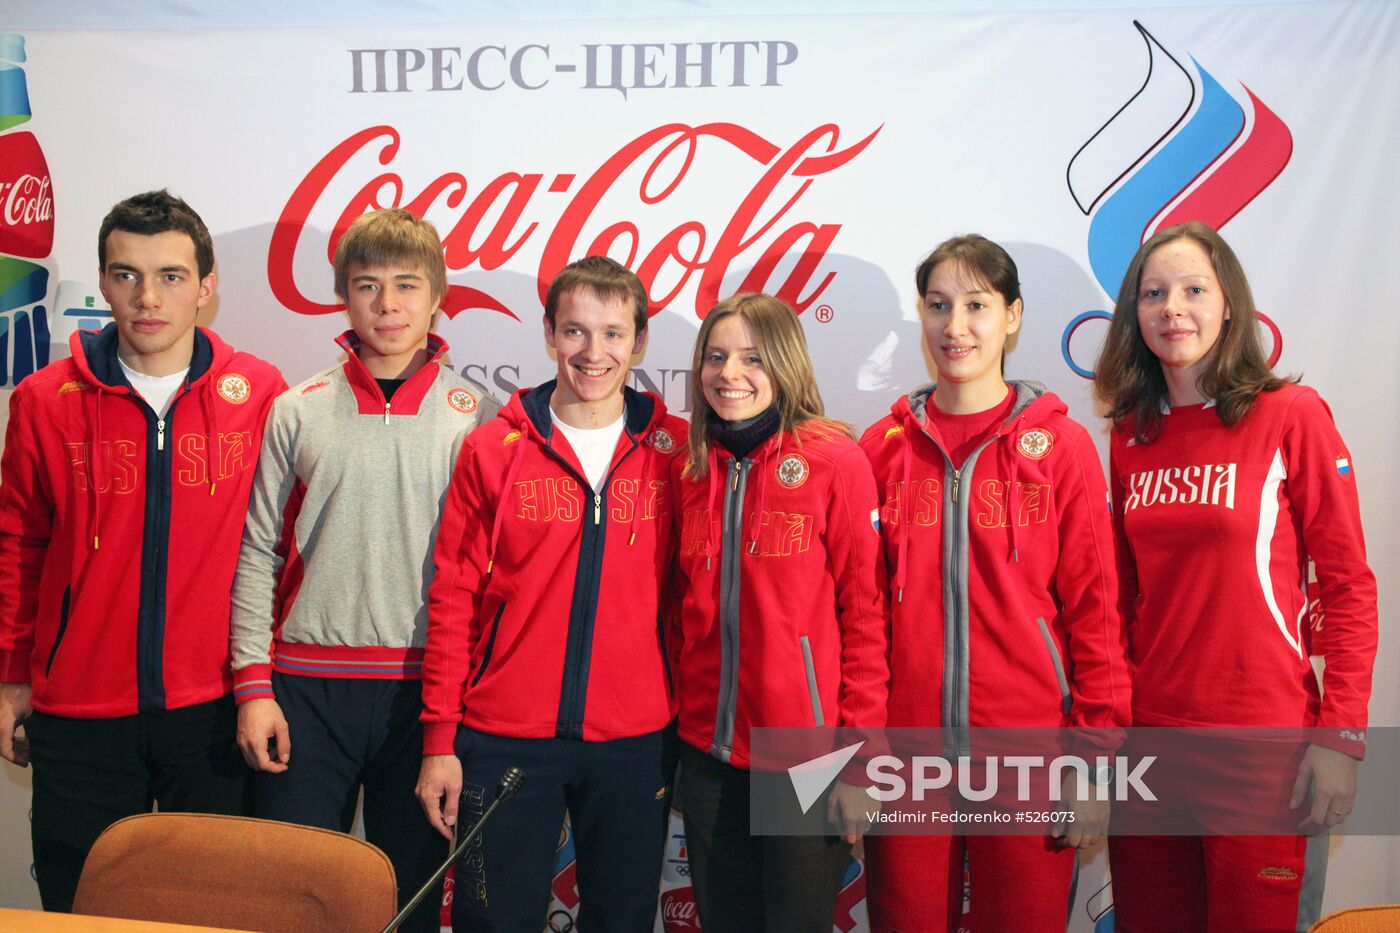 Russian Short Track Federation news conference